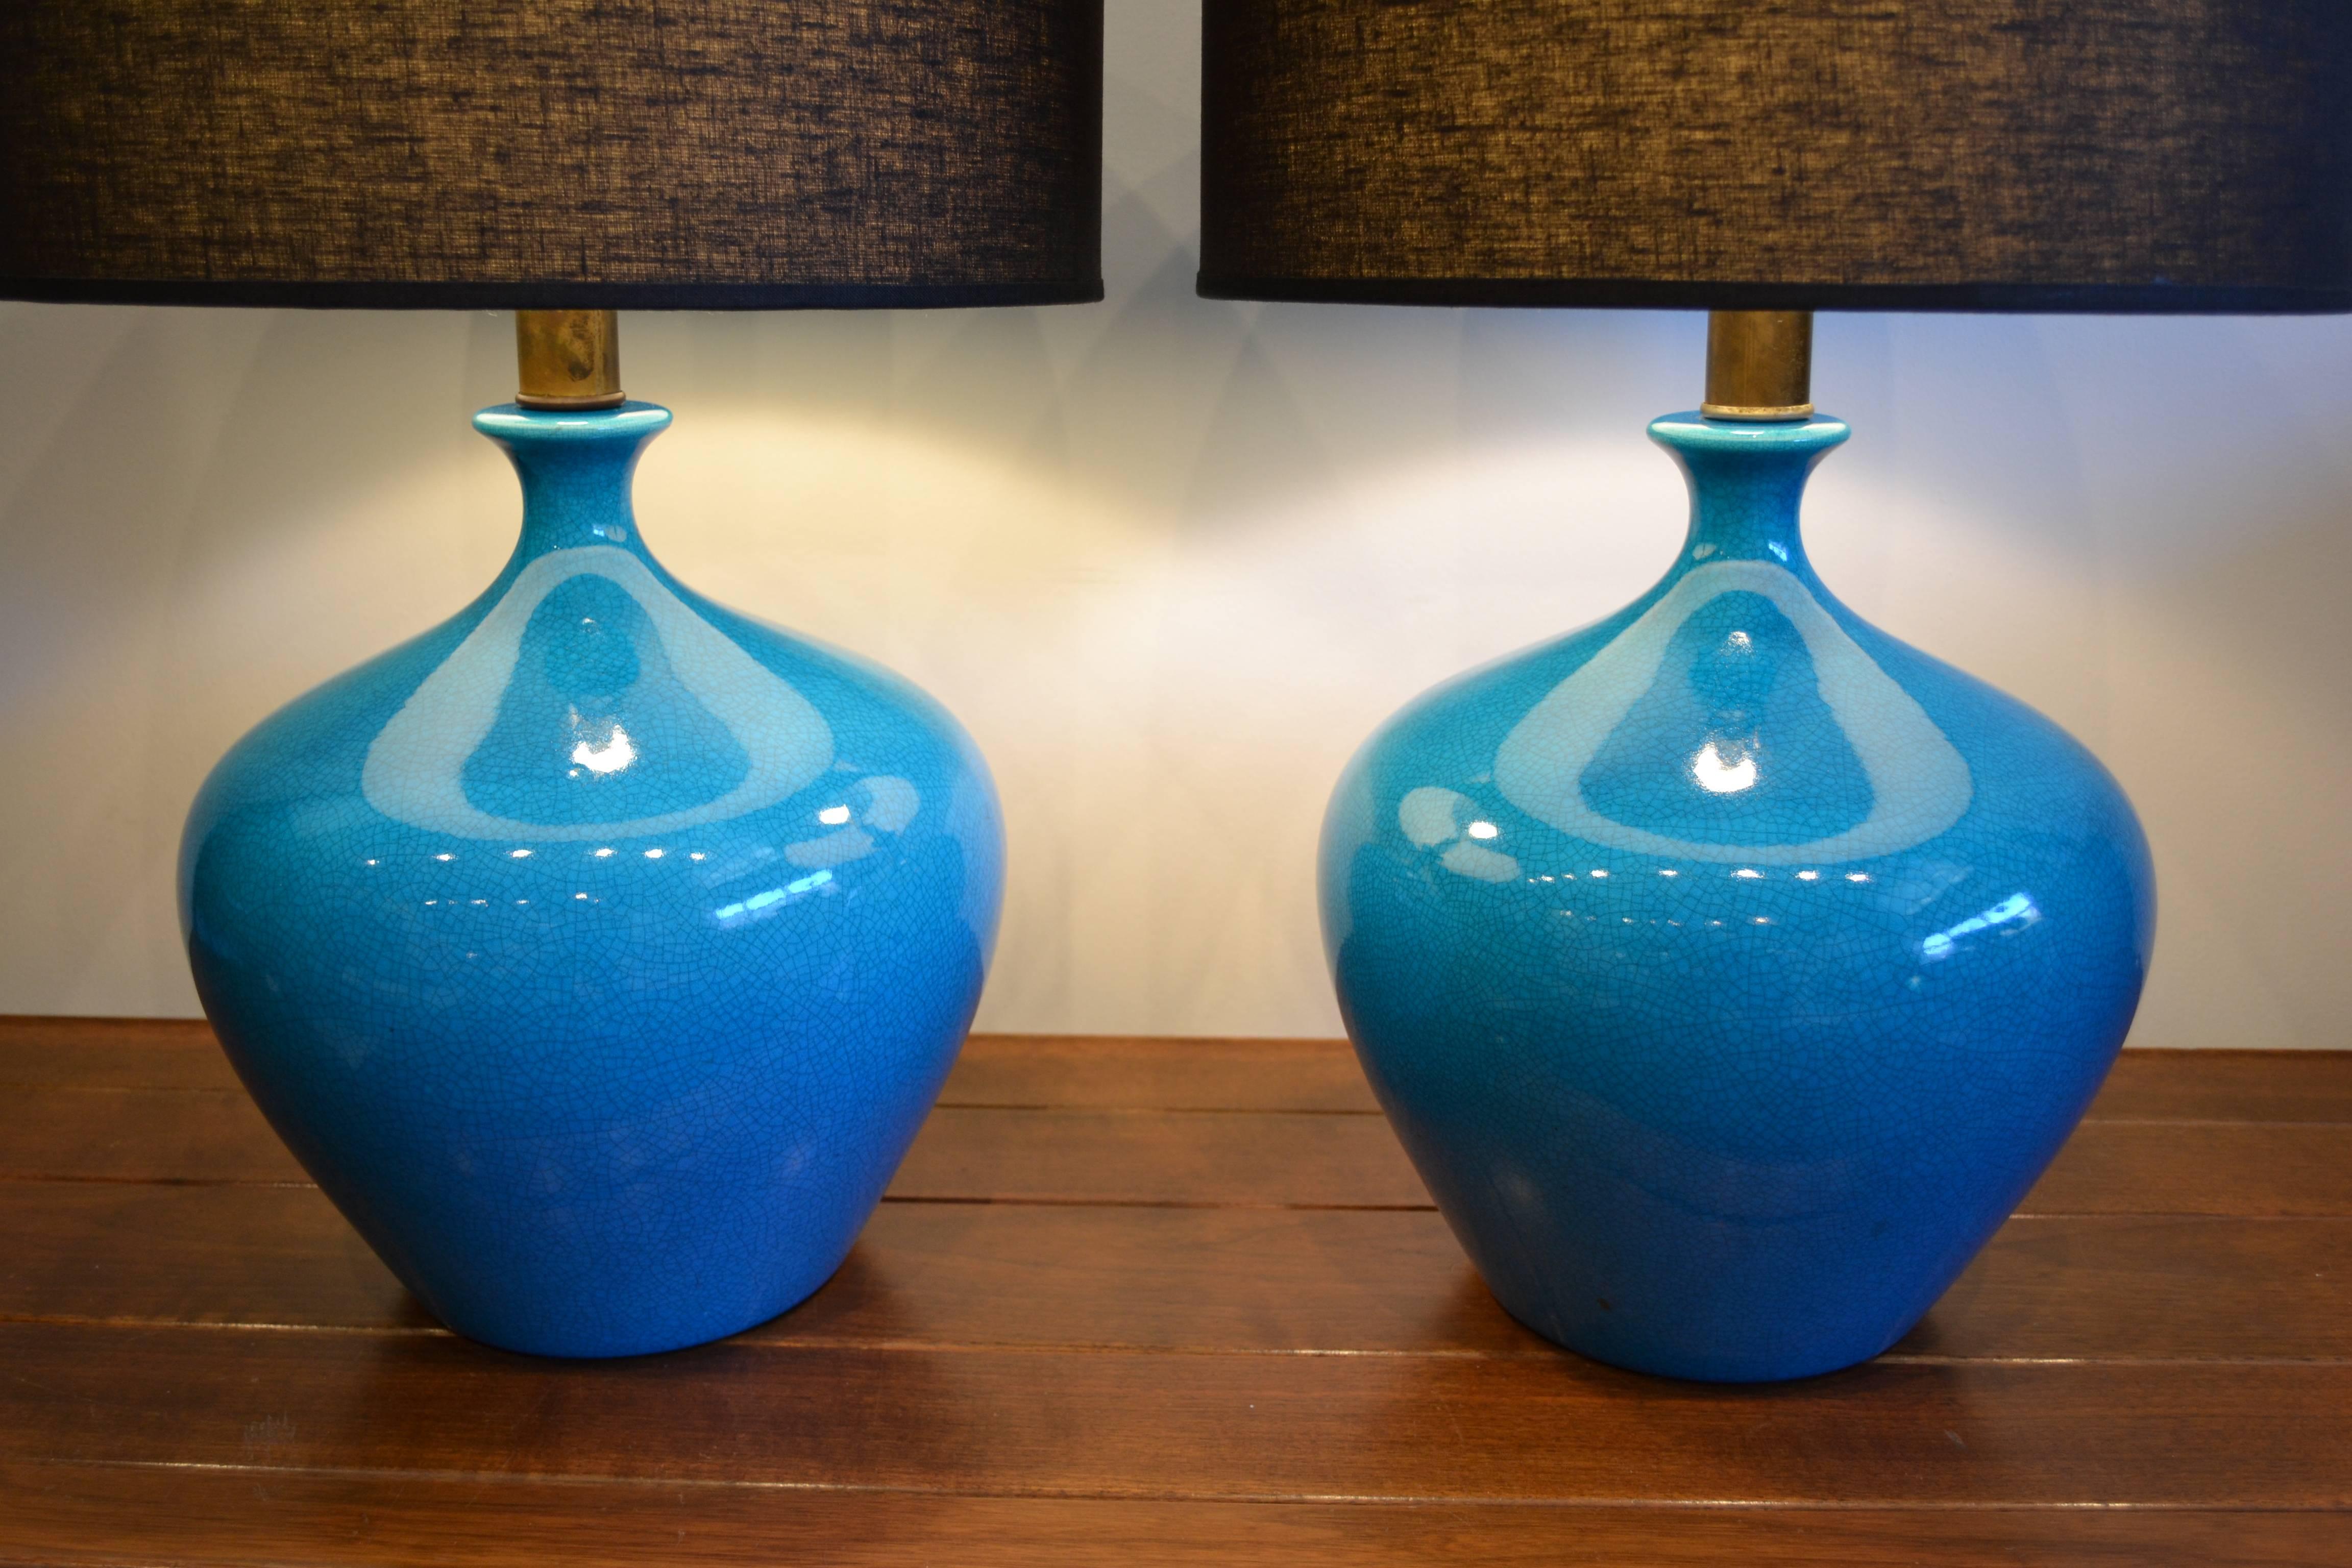 Exceptional massive  pair of glazed Mid-Century Modern tourquoise blue ceramic table lamps, beautiful crazing pattern within glaze.  VERY vibrant in color.  shades not included.